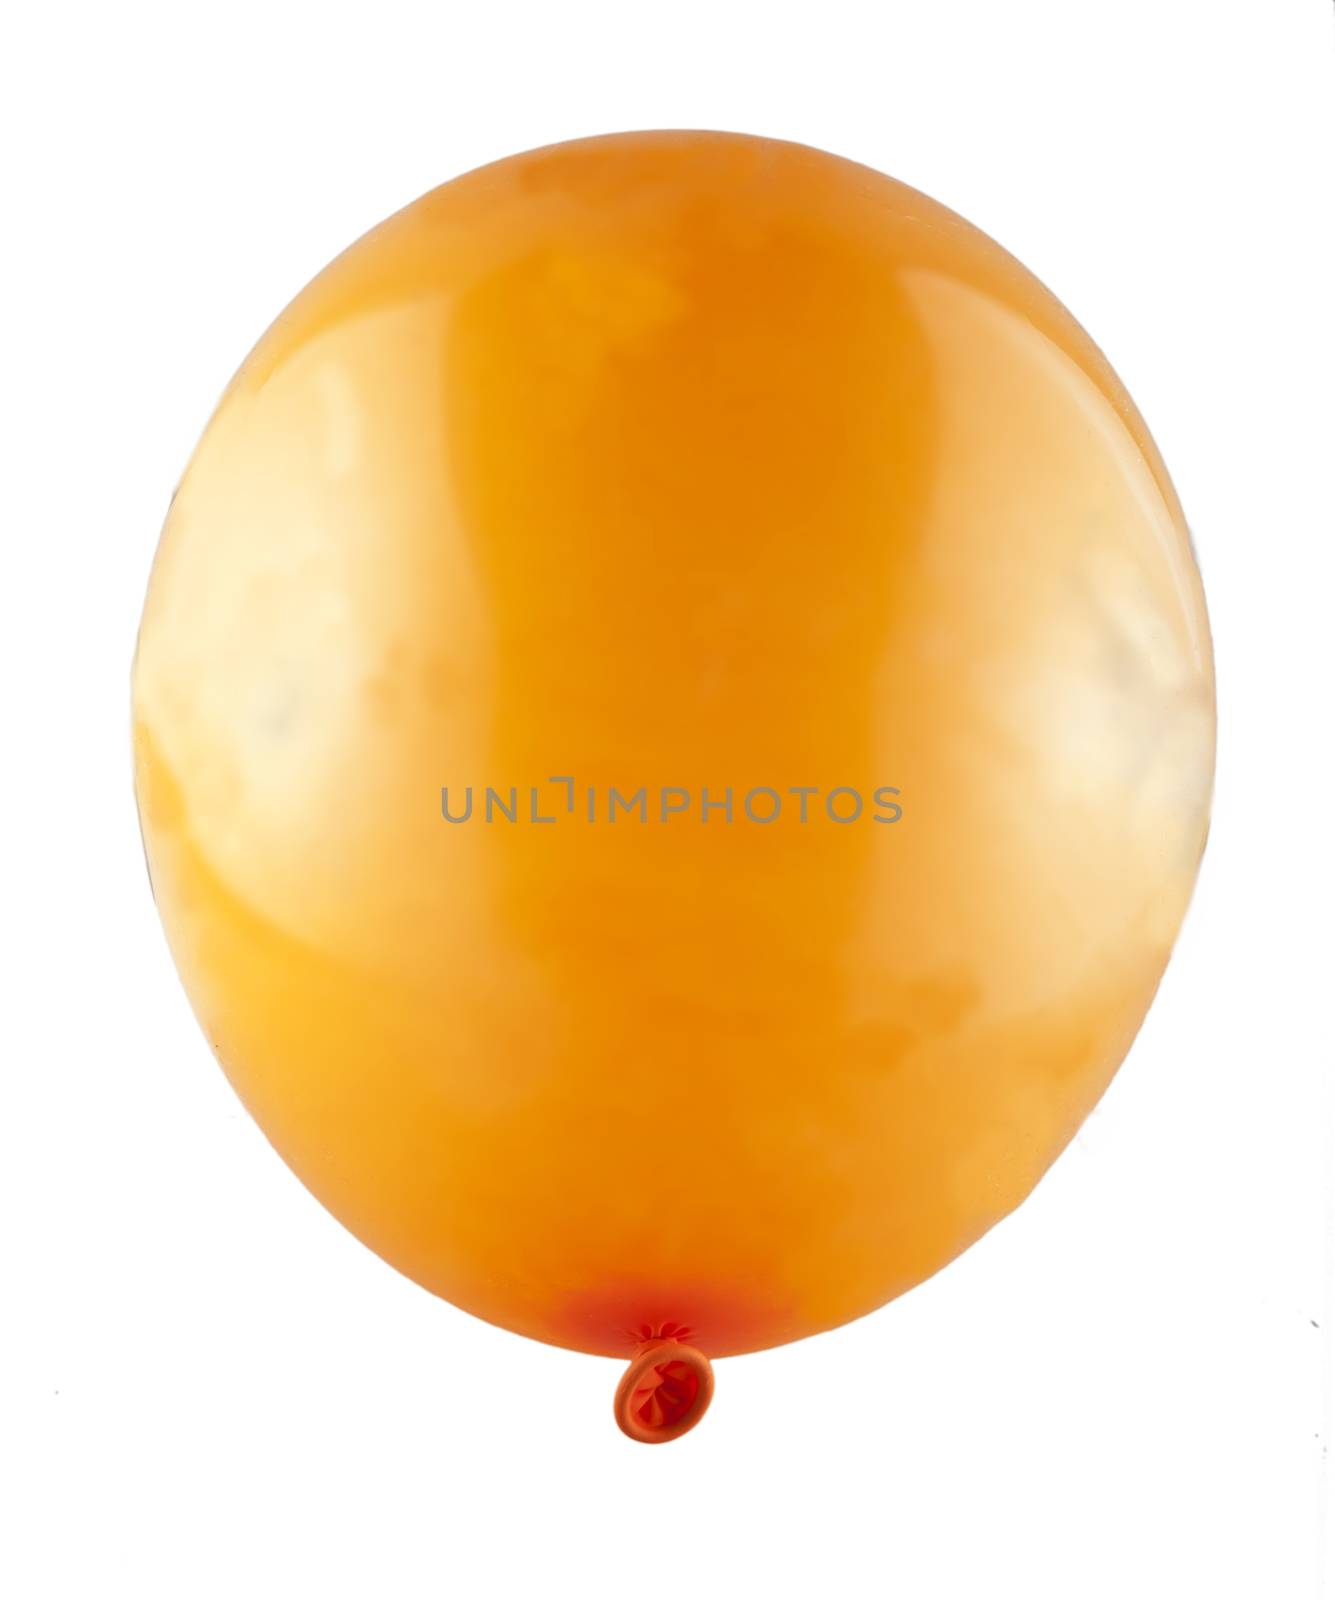 Orange balloon isolated over a white background